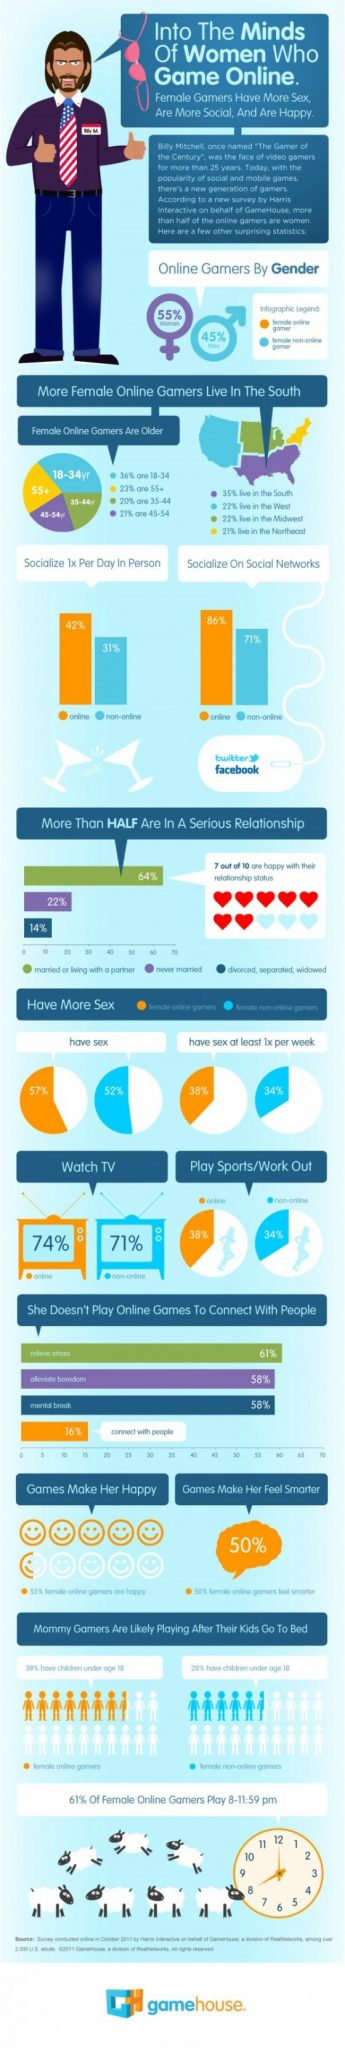 infographie femme gamers joueuse